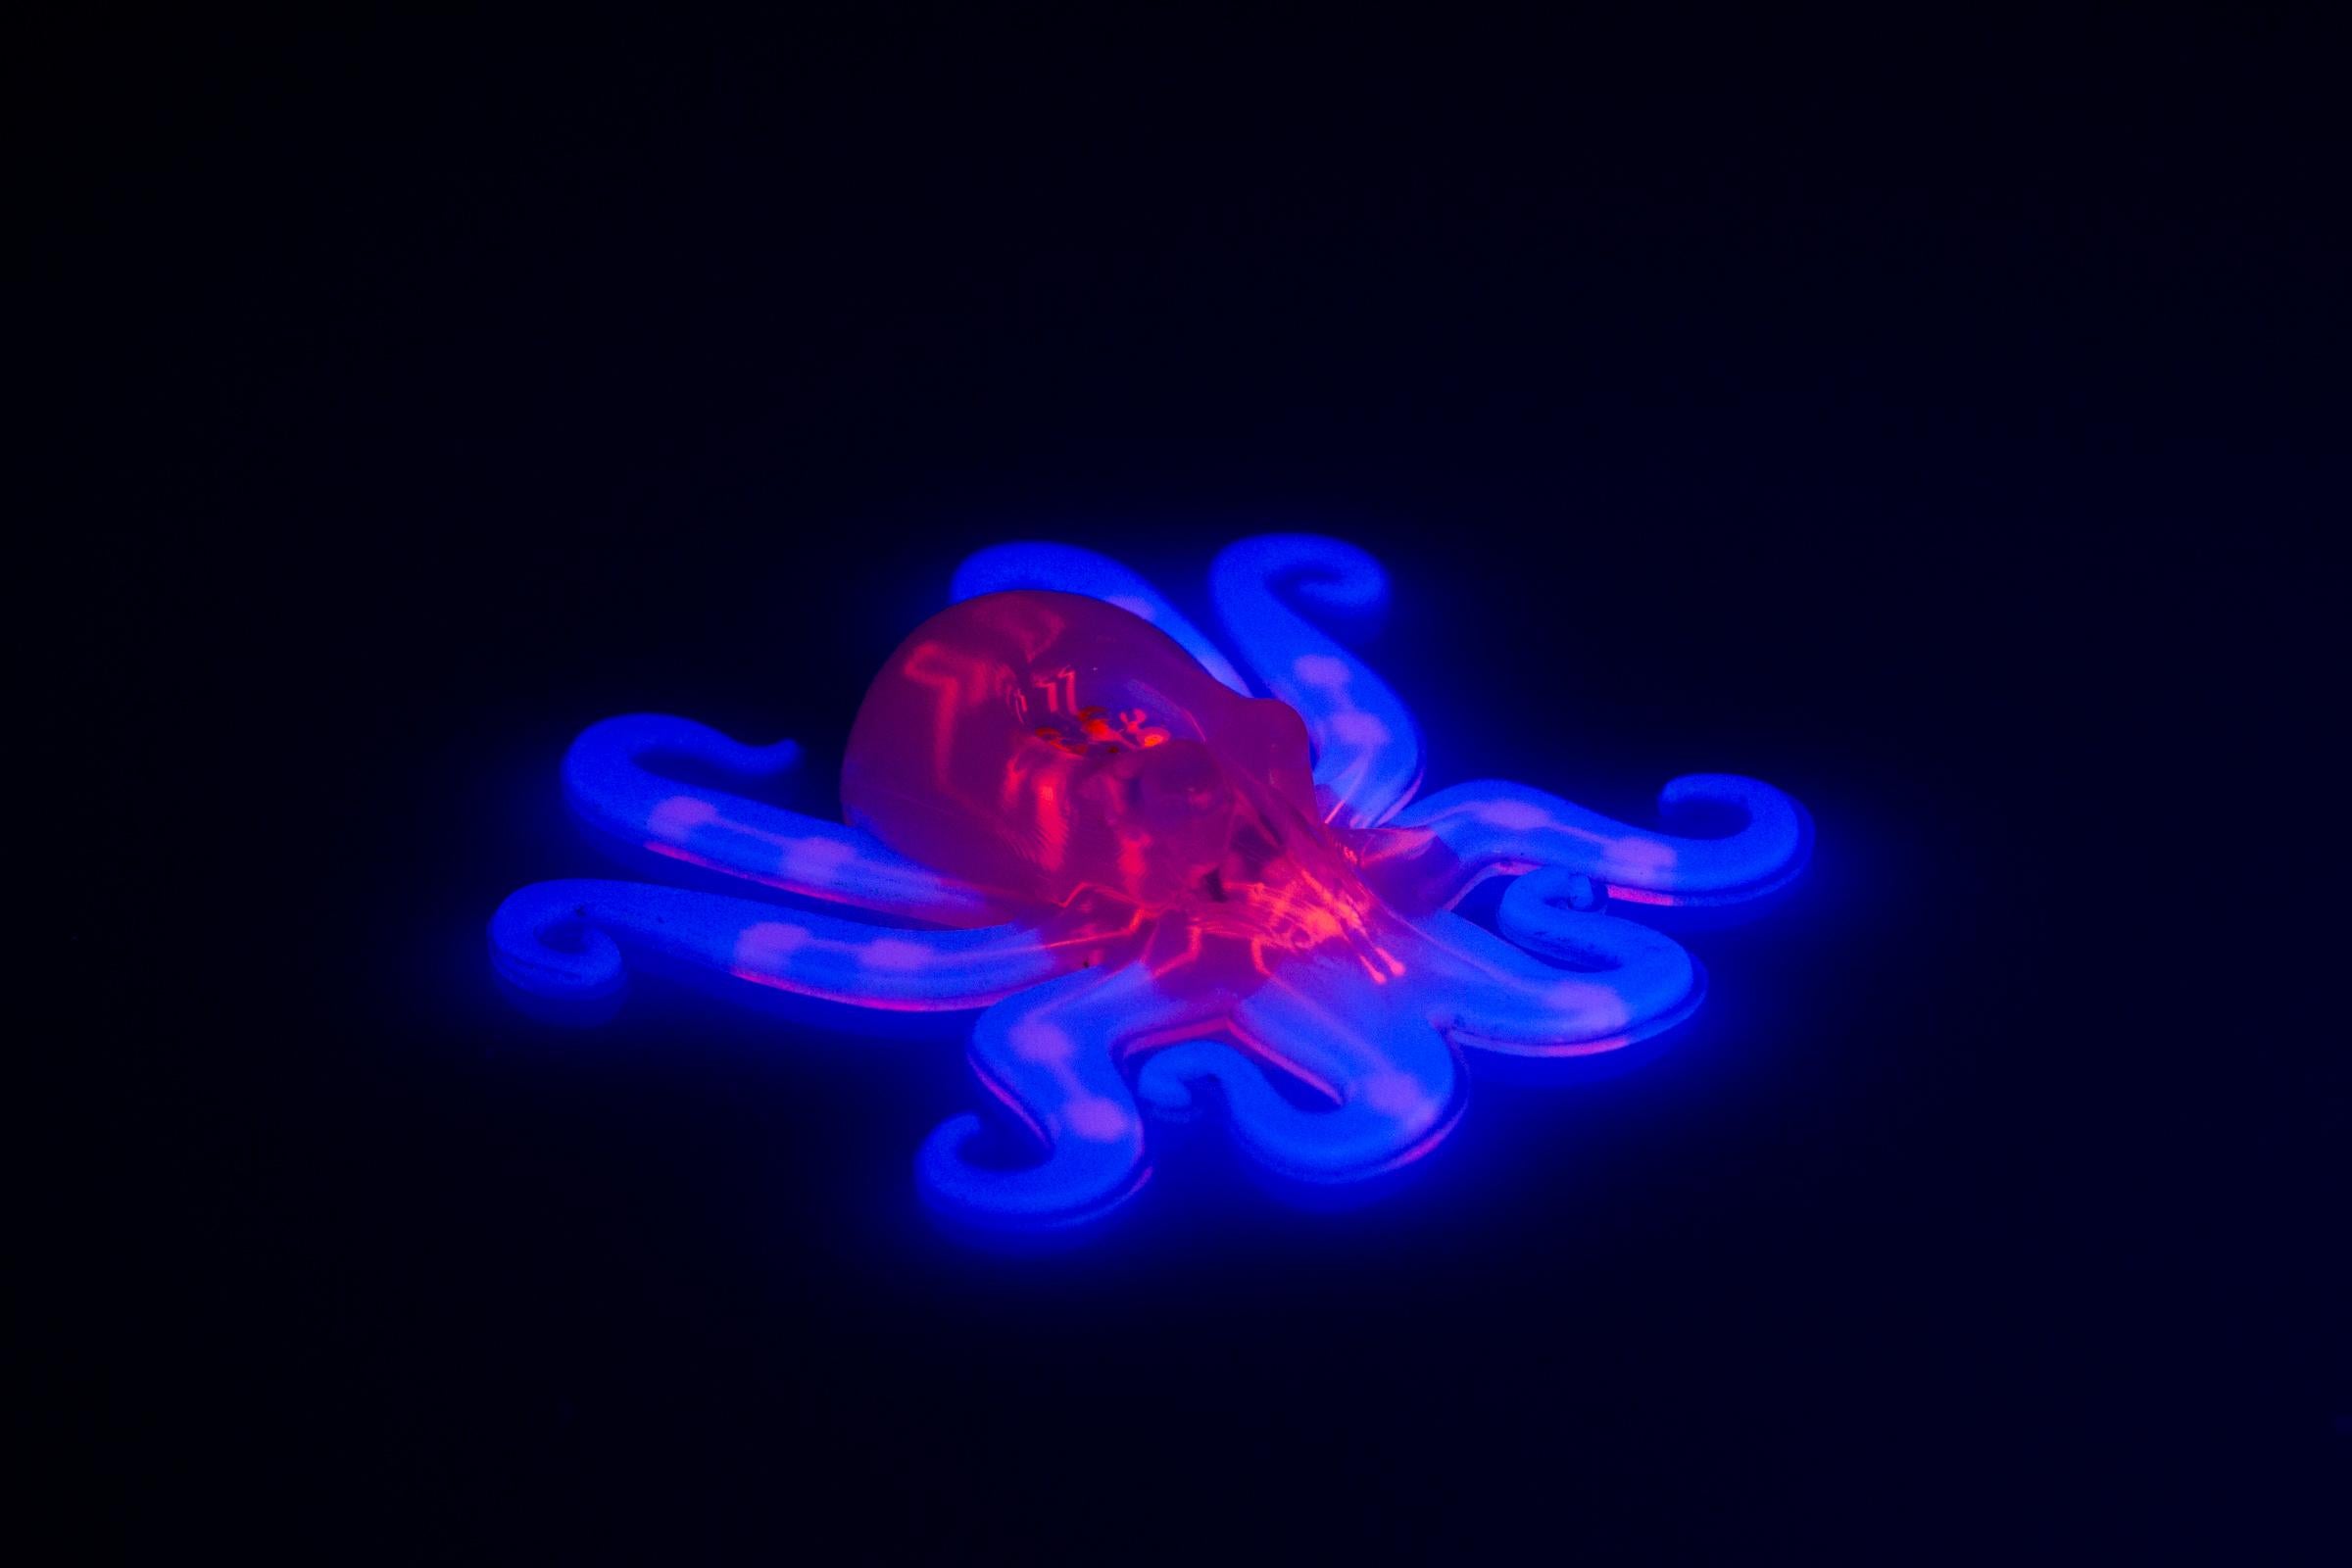 Meet Octobot, an entirely soft, autonomous robot, designed by engineers at Harvard University